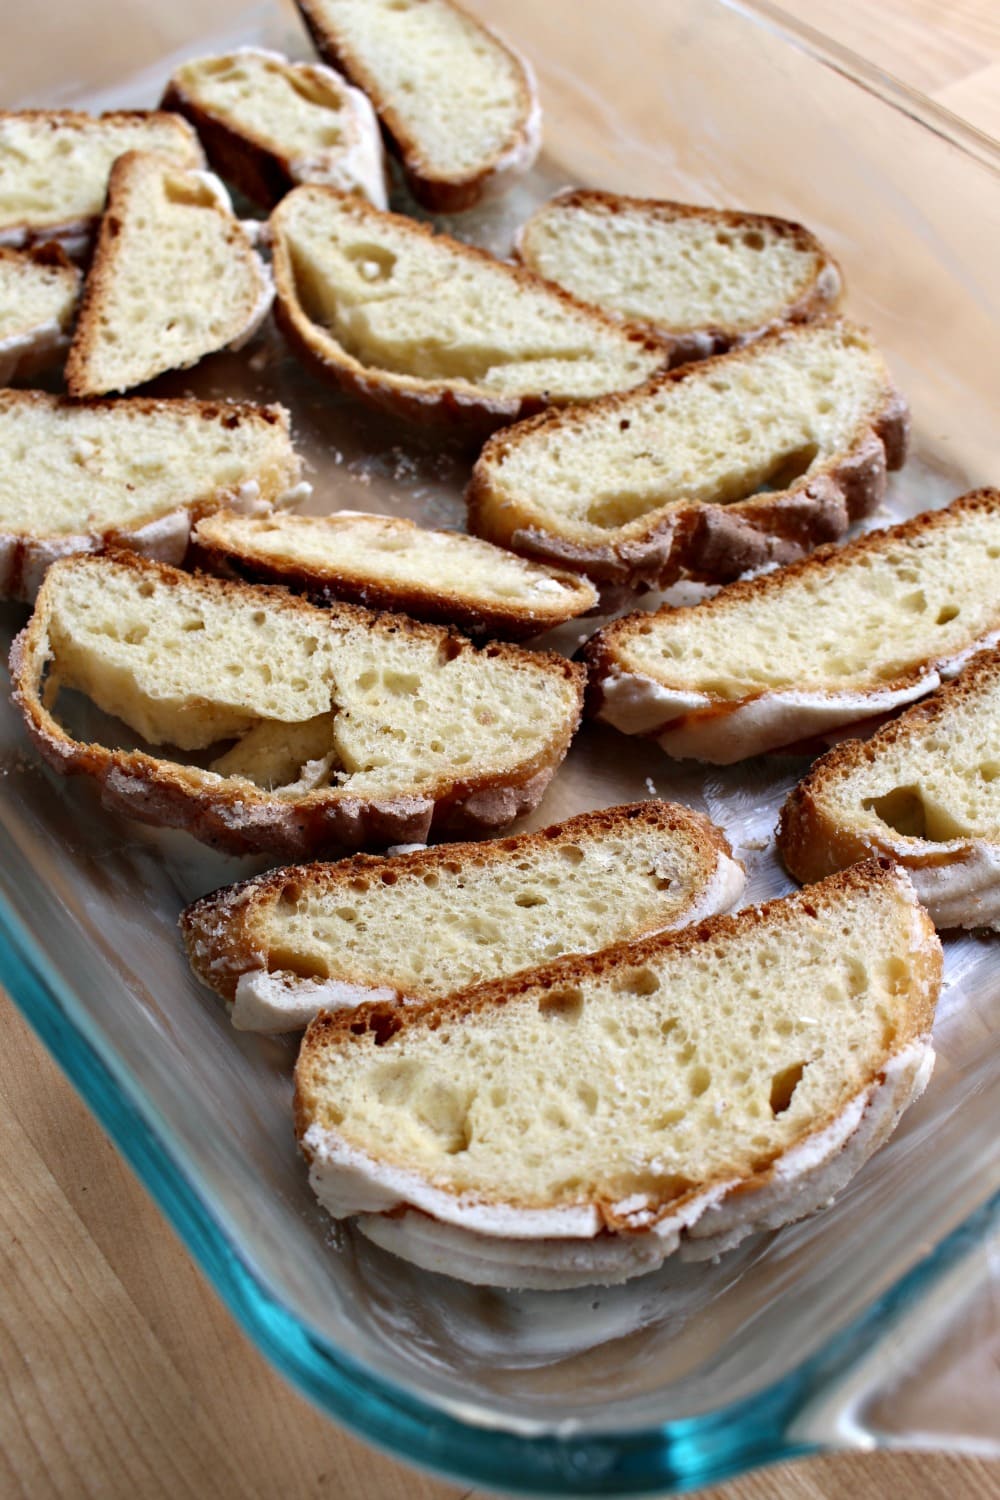 Sliced conchas in a single layer on a glass container.